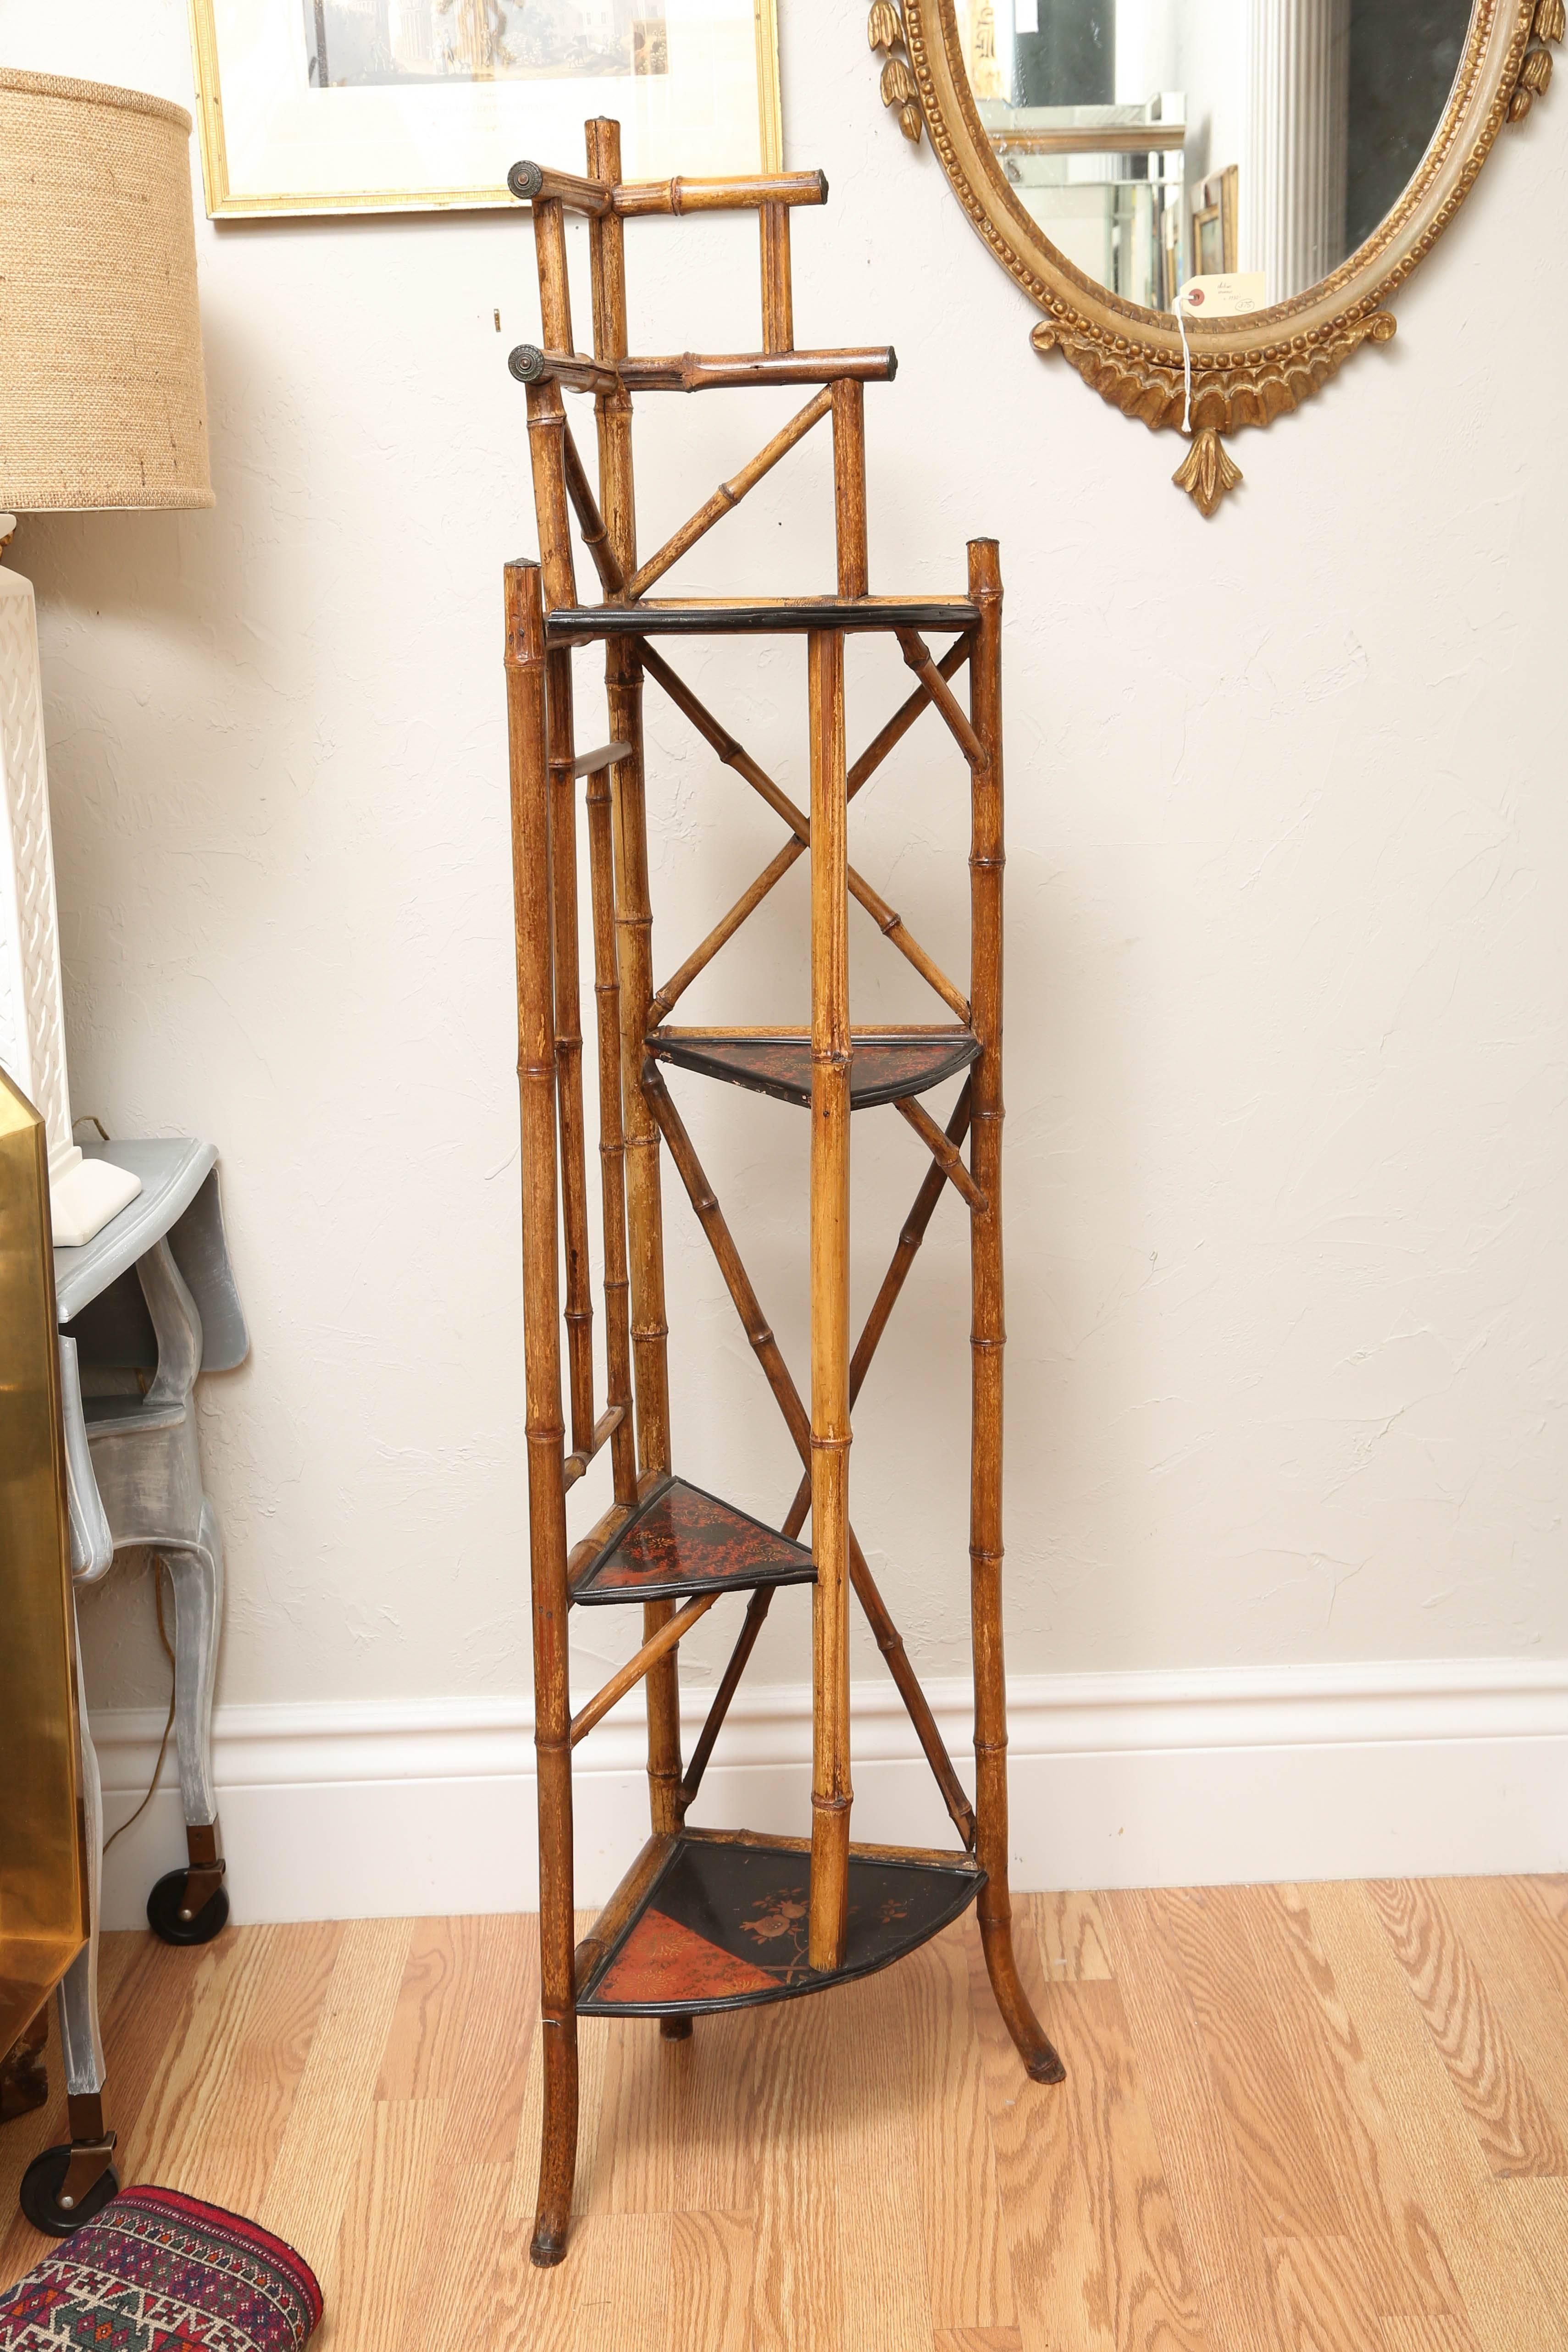 English antique bamboo corner whatnot with multiple shelves.